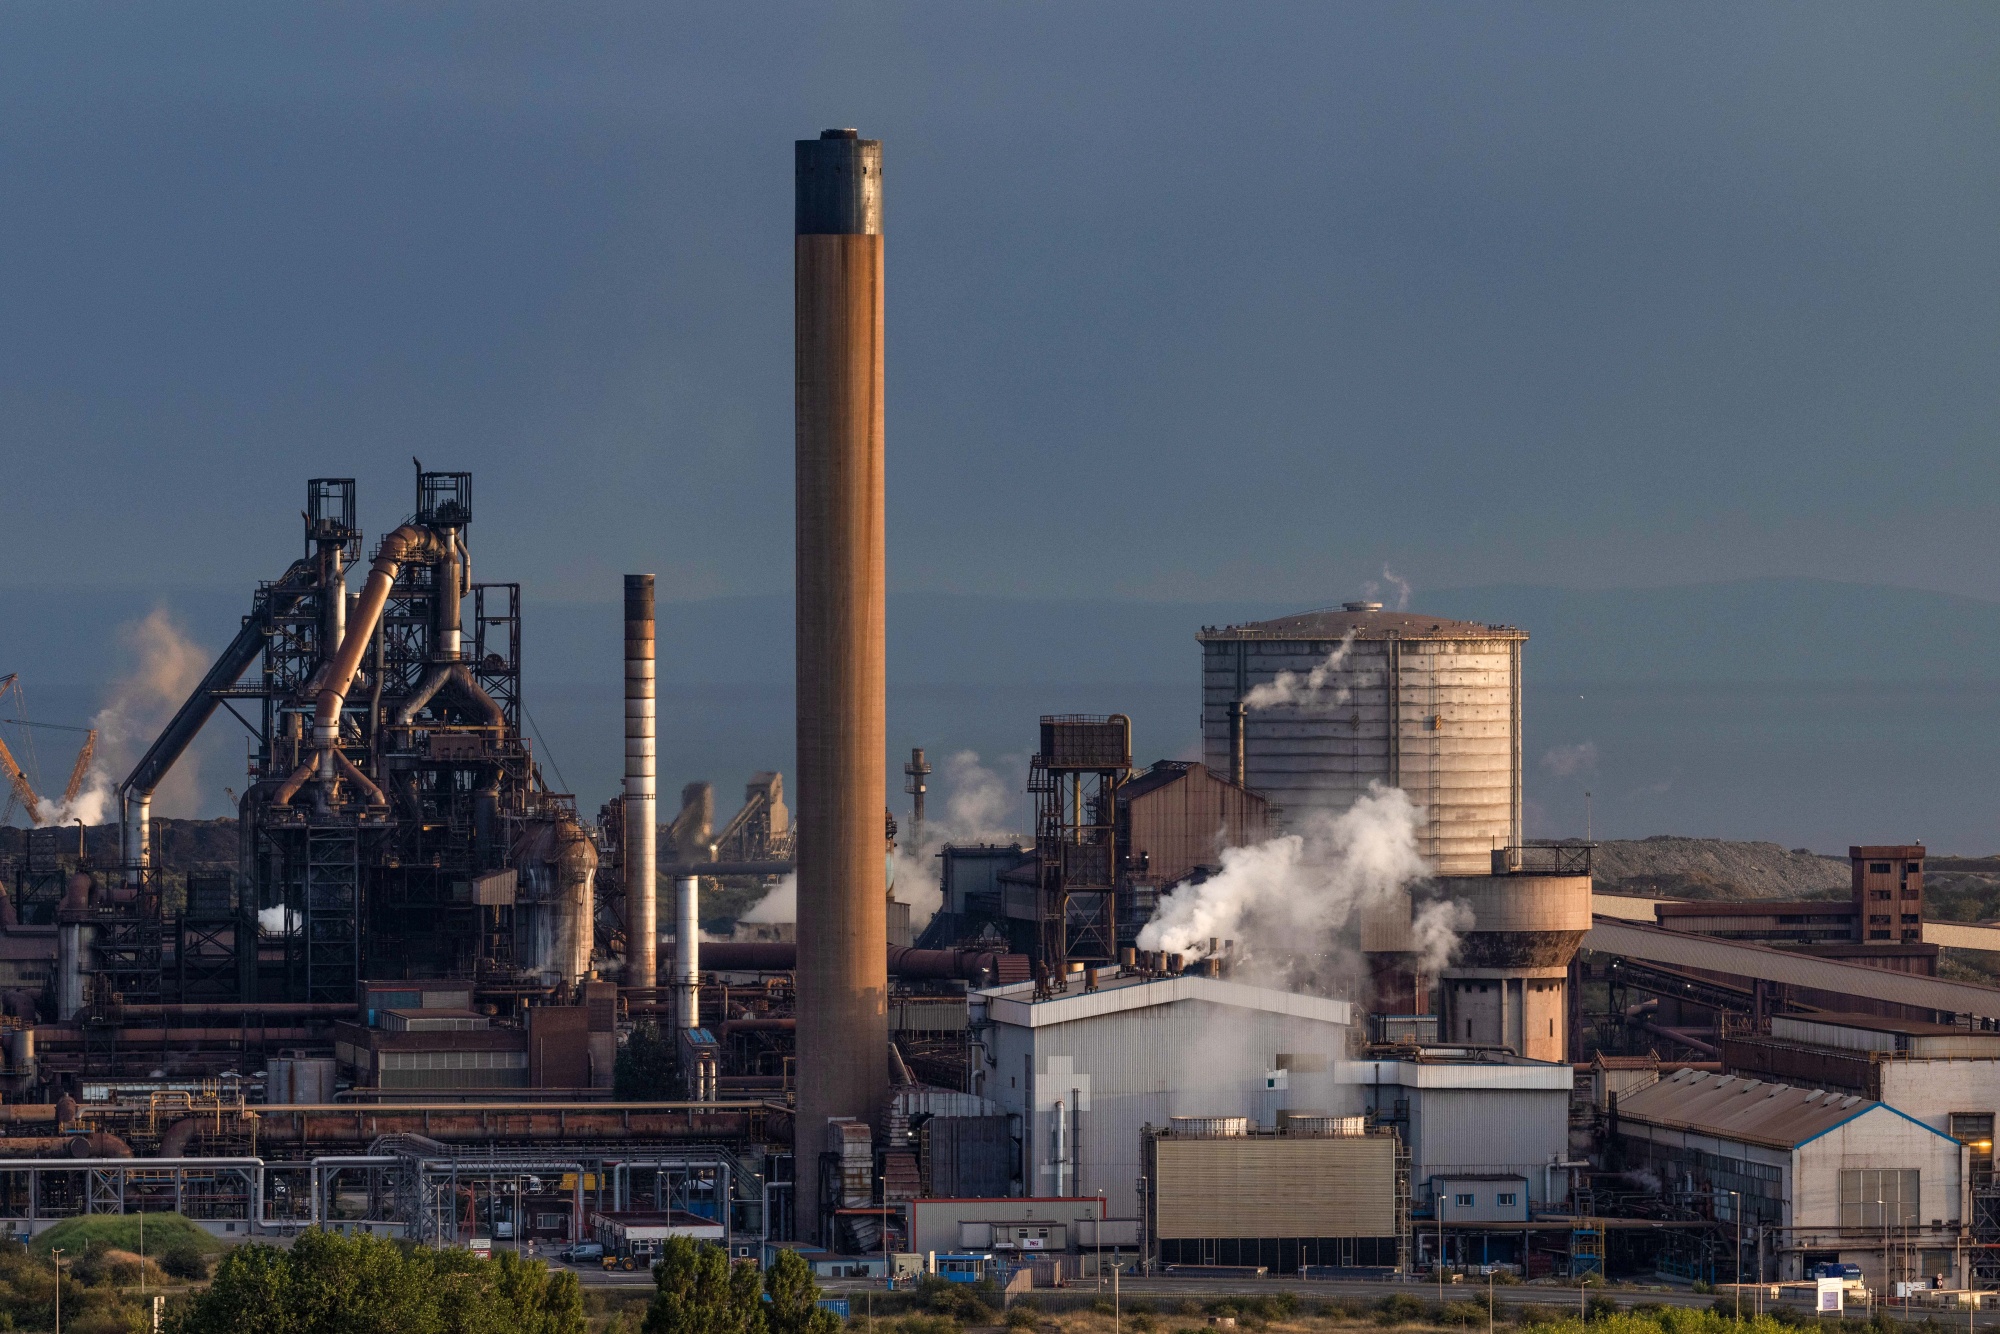 Tata Steel Increases Capital Expenditure Plan for Fiscal Year 2023